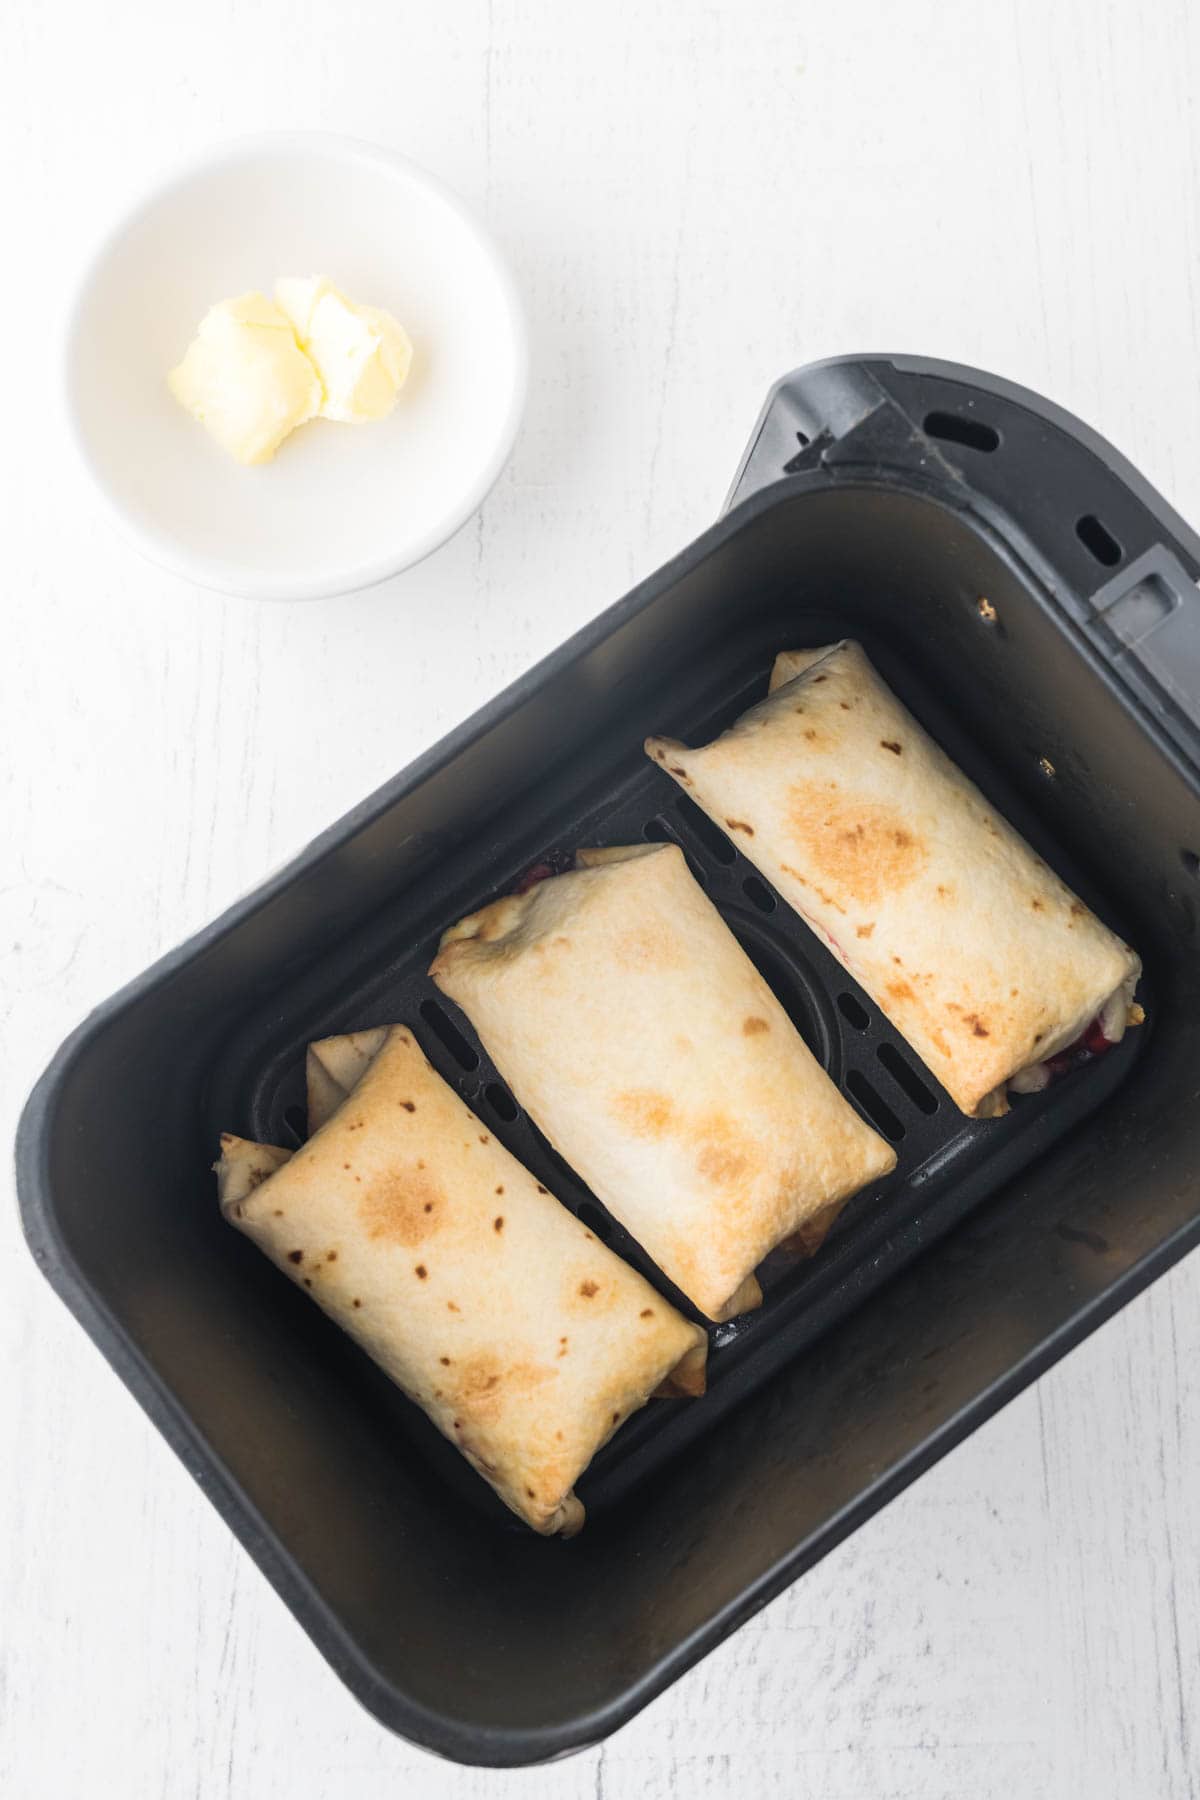 Cooked air fryer cheesecake chimichangas in an air fryer basket.